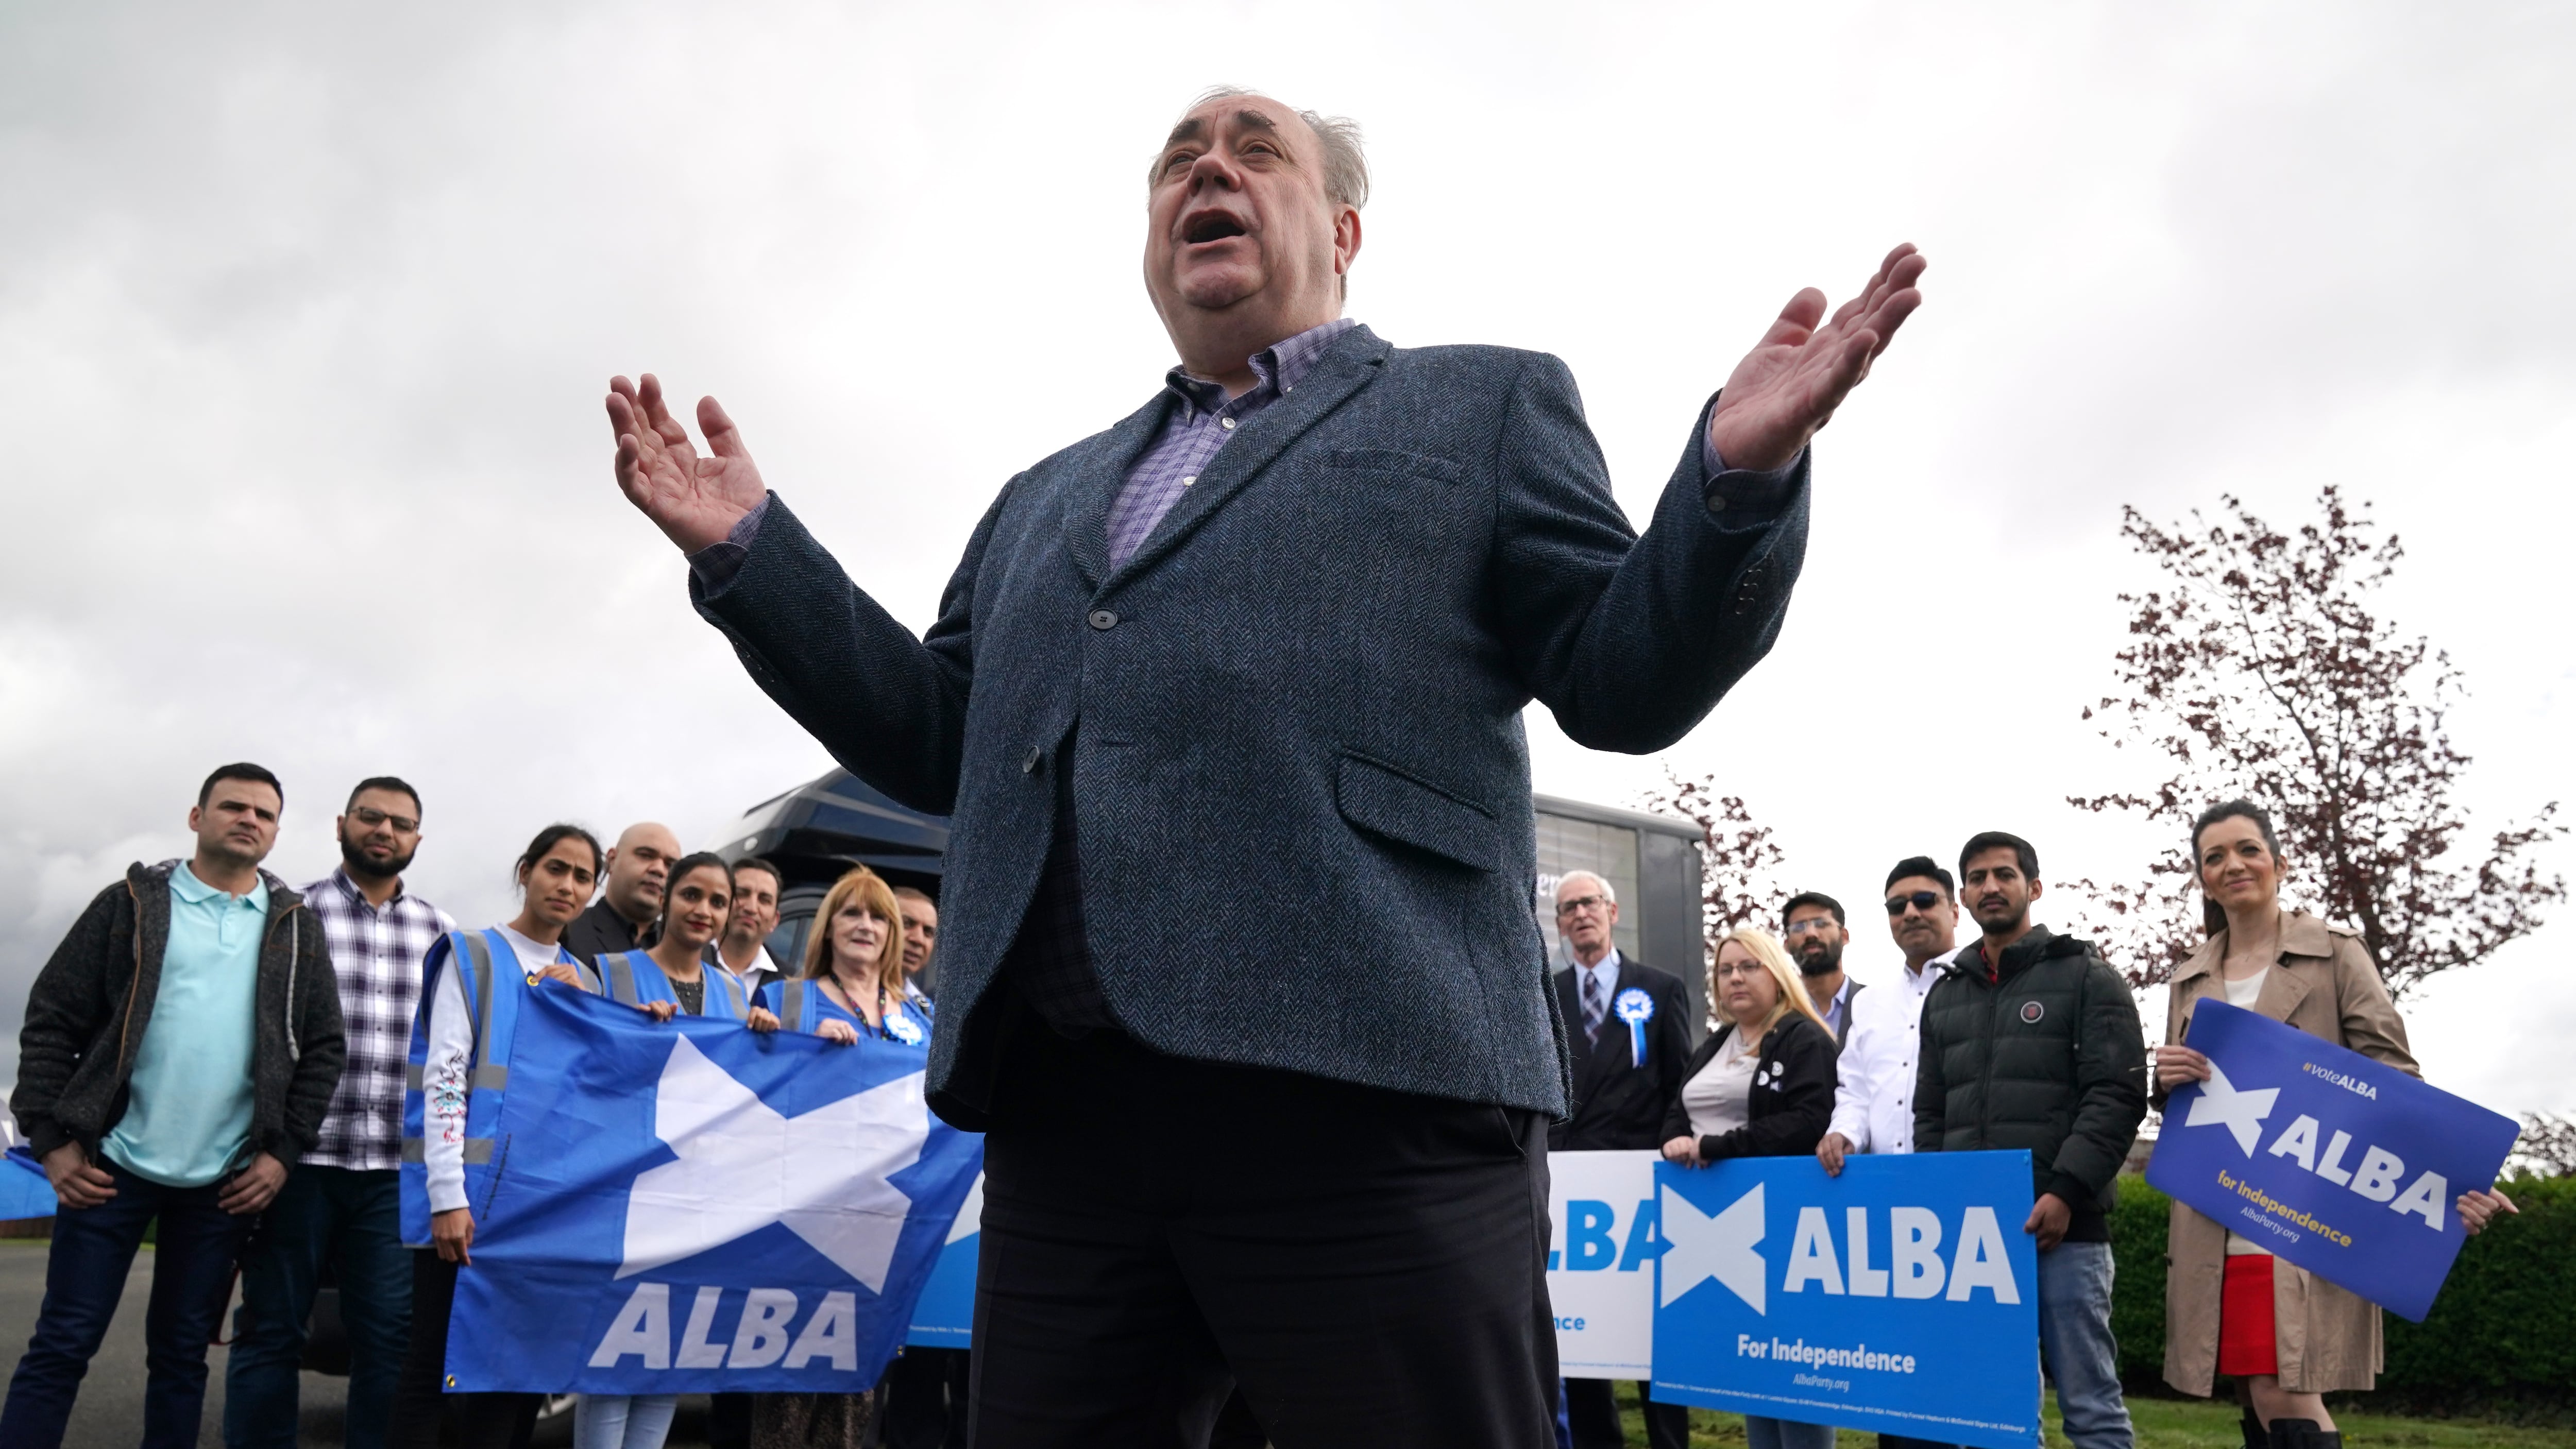 Alex Salmond said his Alba Party was the ‘natural home’ for independence supporters